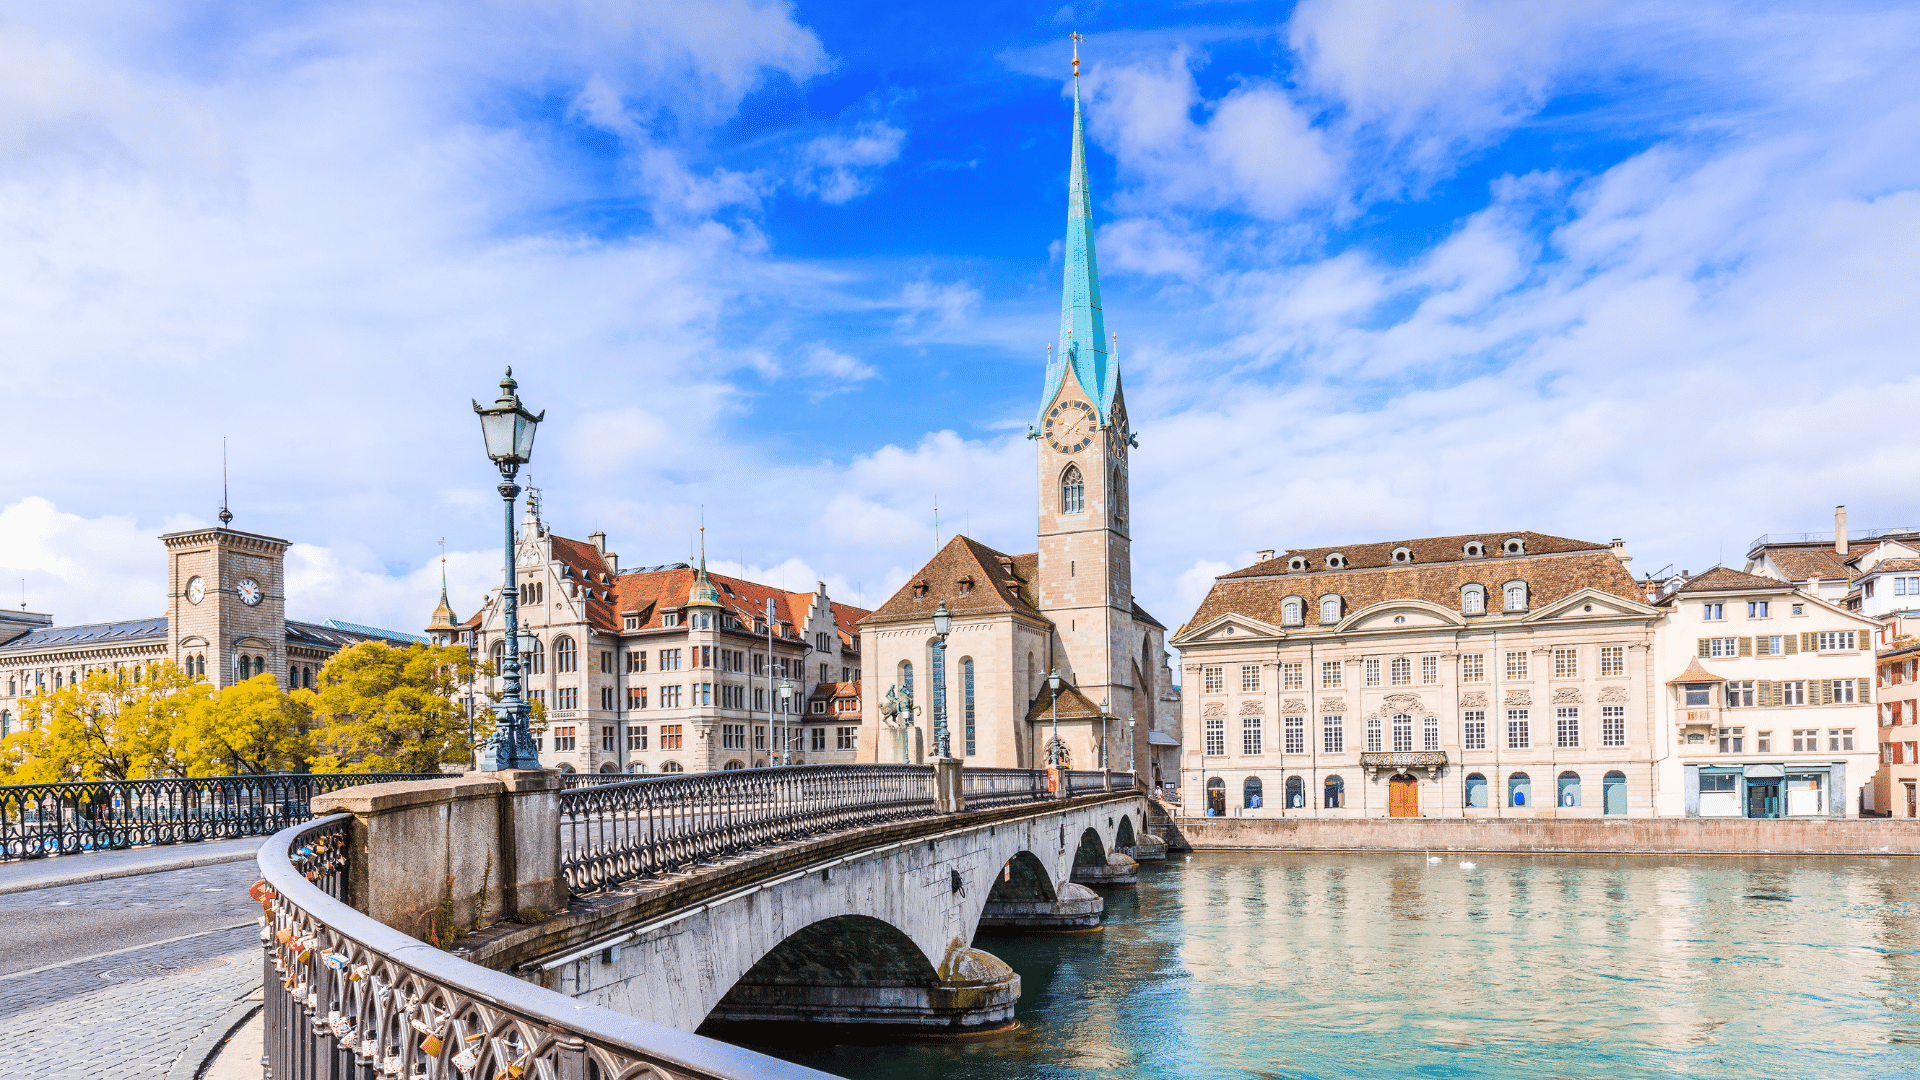 Embark on a 2-hour sightseeing tour of Zurich